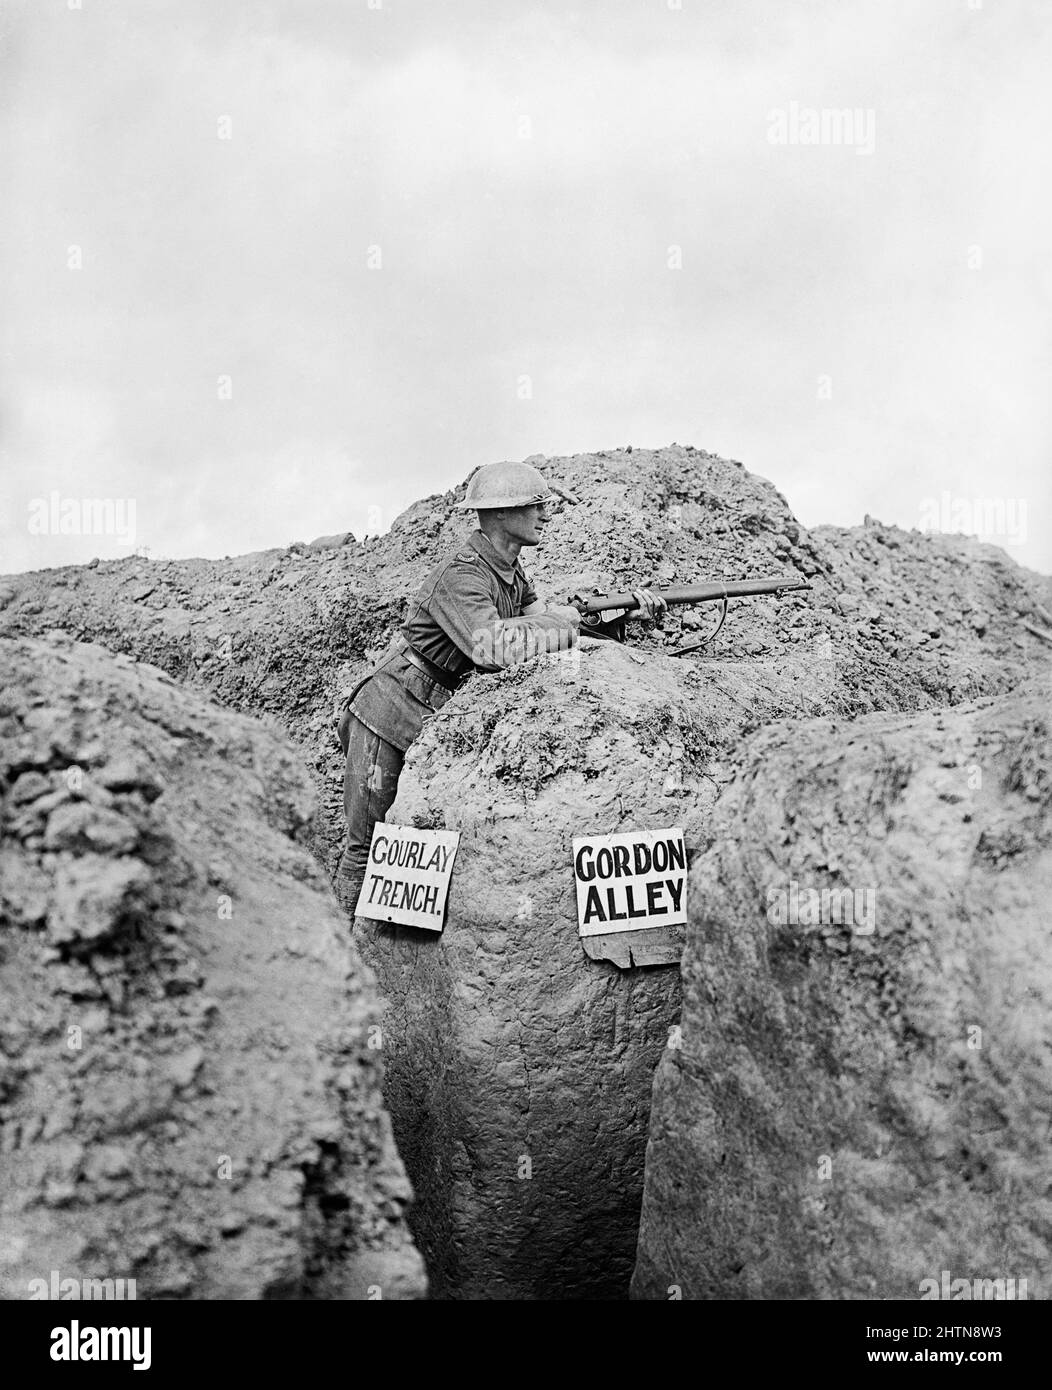 A sentry of the 10th Battalion, Gordon Highlanders at the junction of two trenches - Gourlay Trench and Gordon Alley. Martinpuich, 28 August 1916. Stock Photo